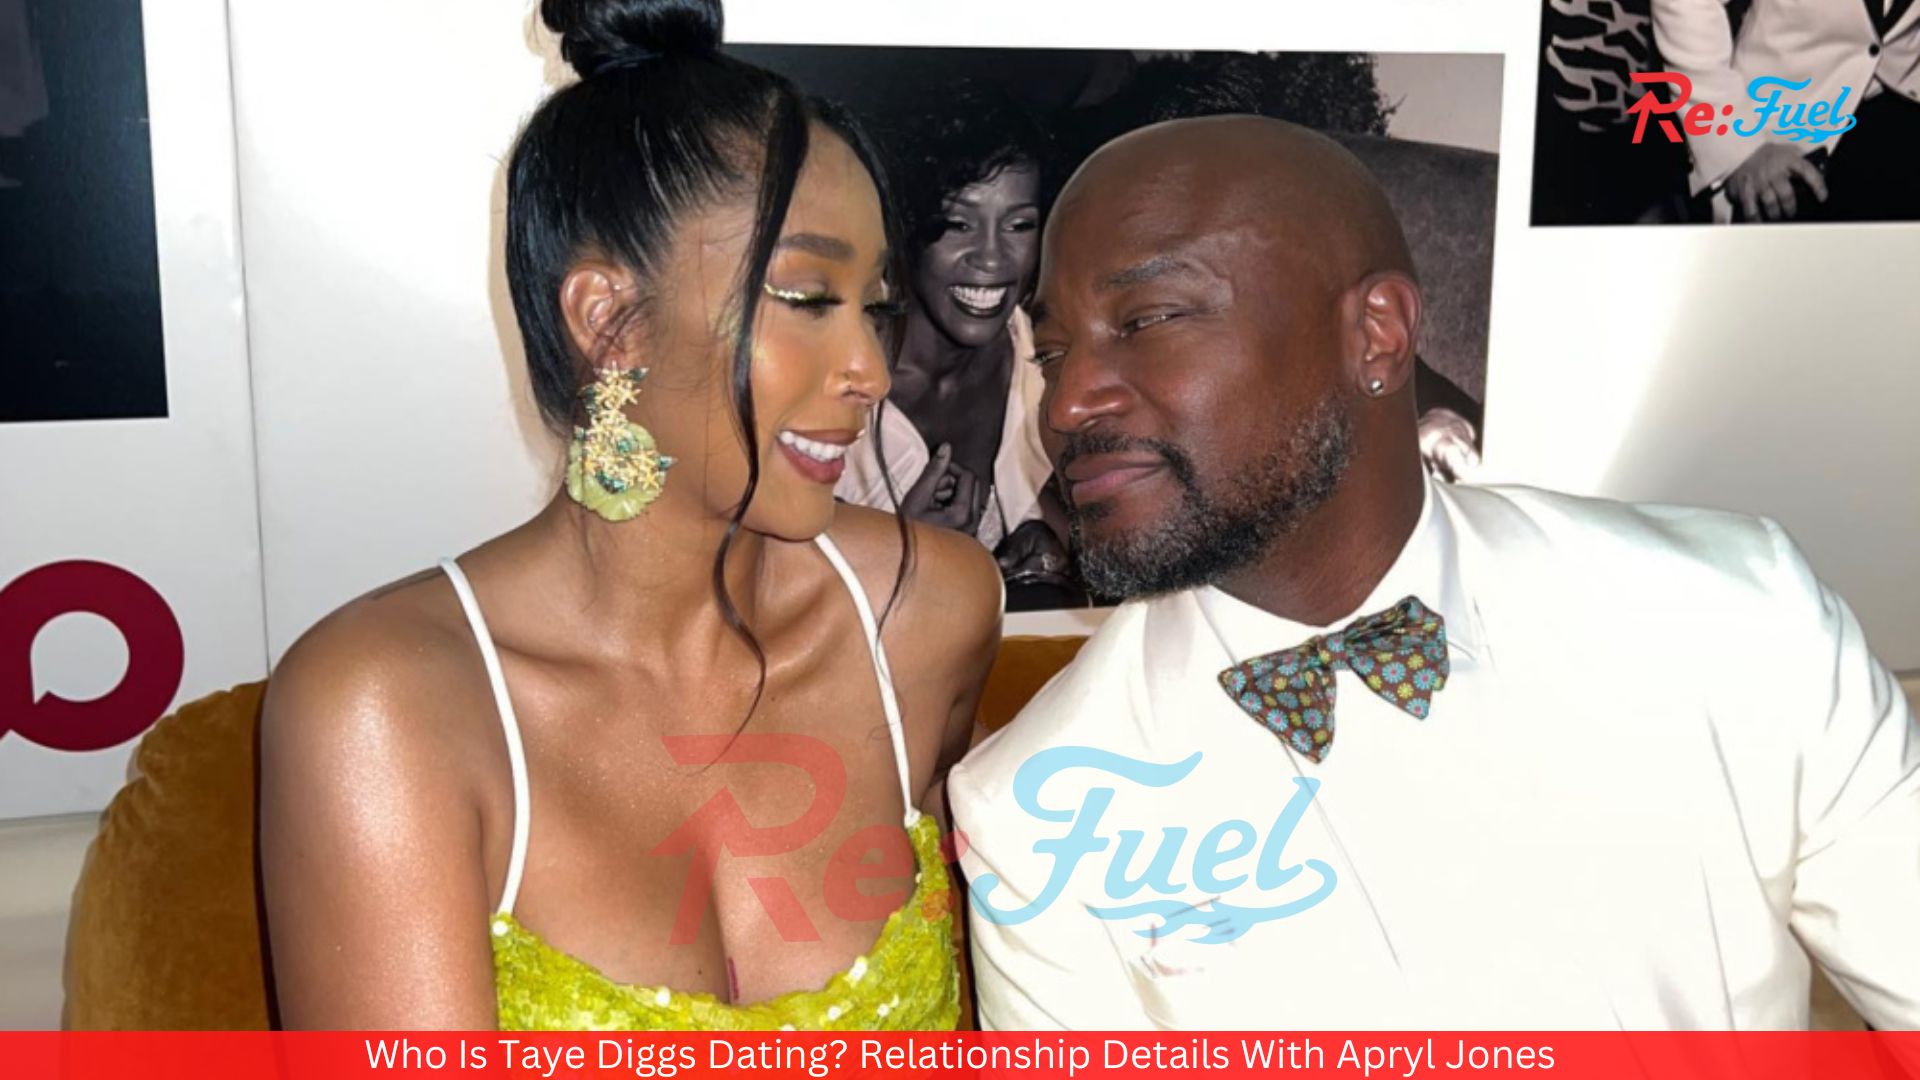 Who Is Taye Diggs Dating? Relationship Details With Apryl Jones